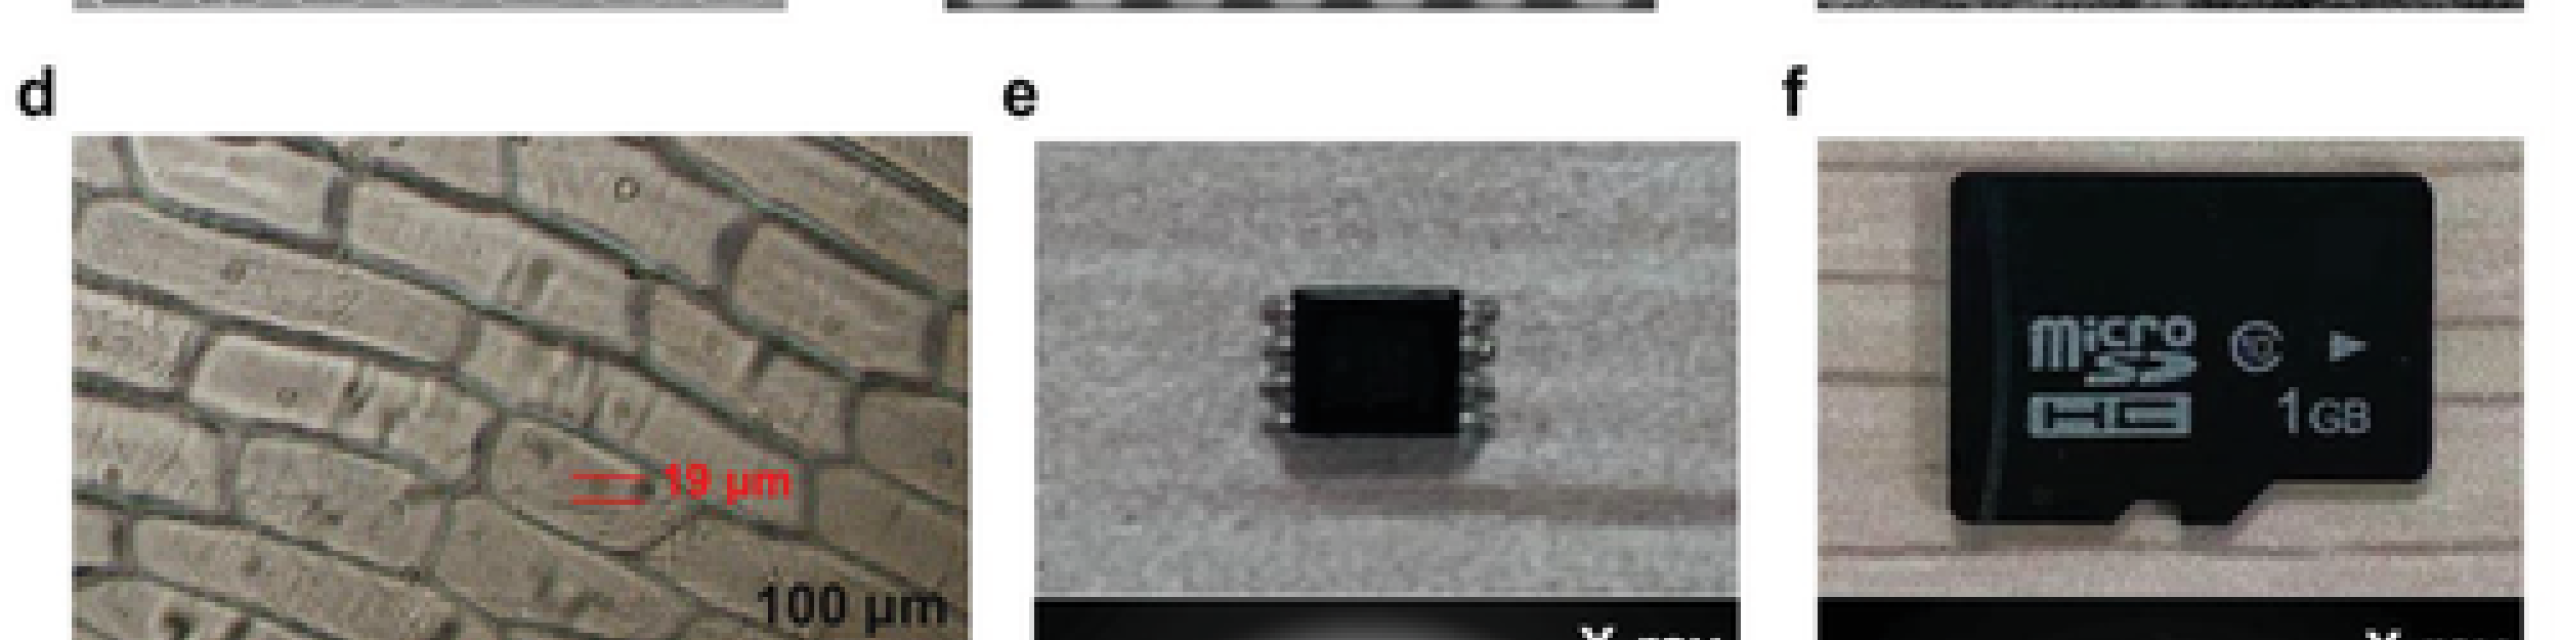 pplication of this X-ray microscopic imaging system